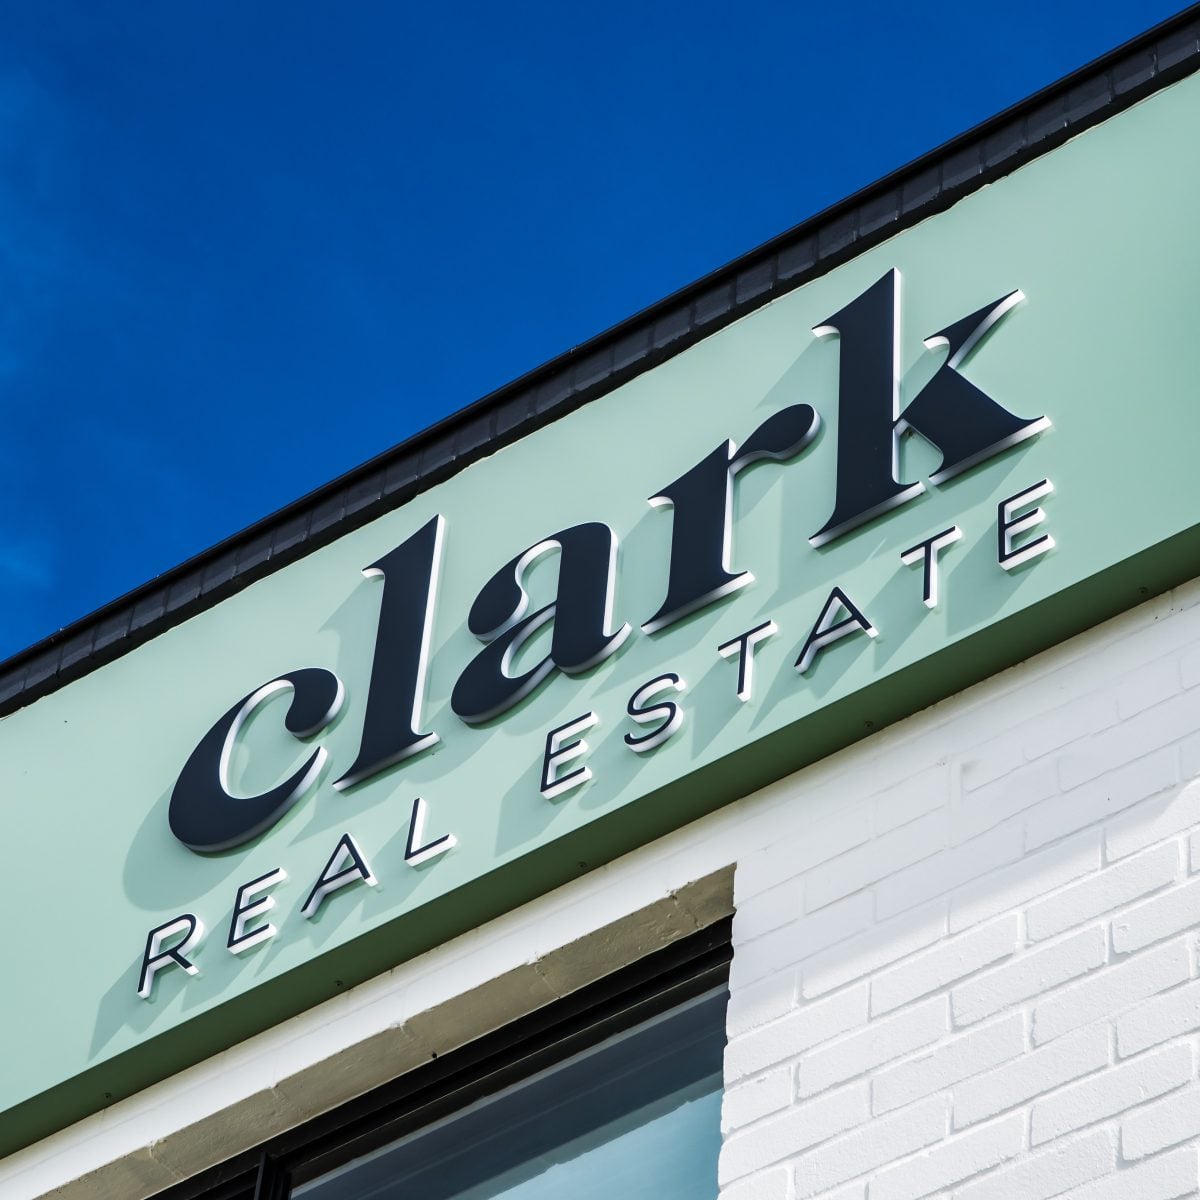 Clark Real Estate brand project